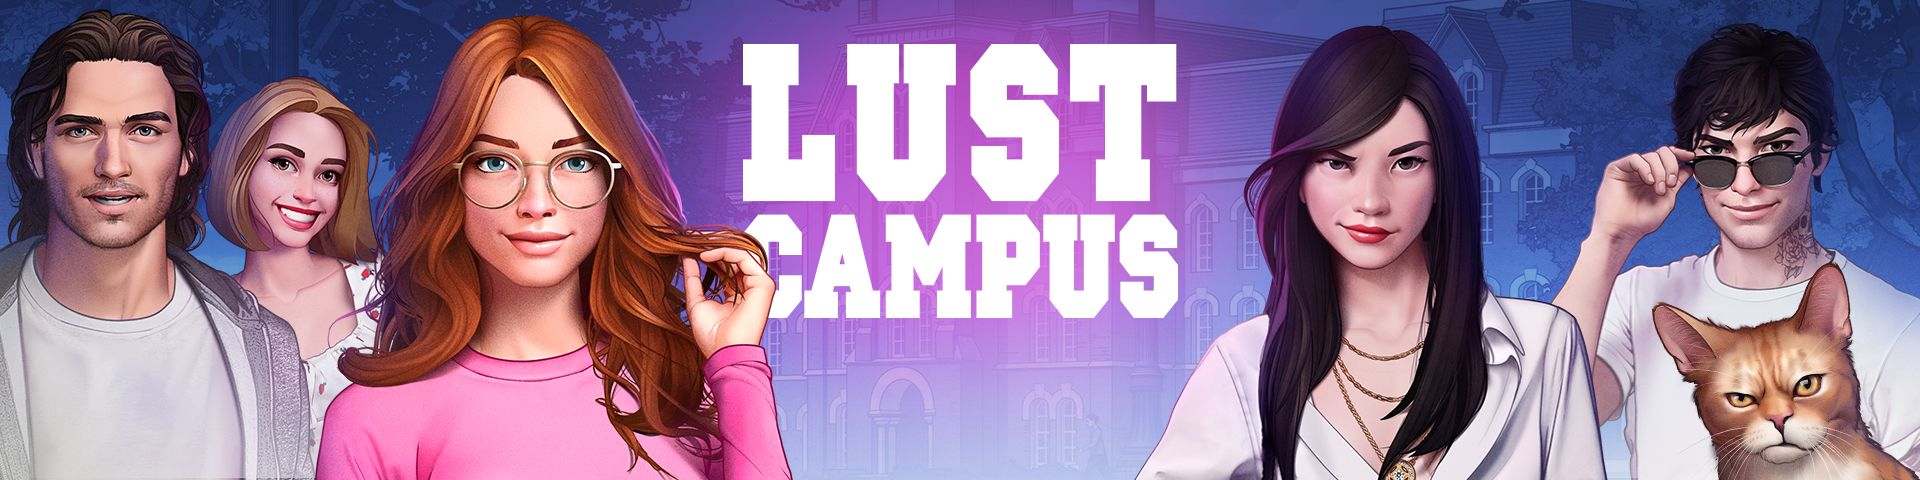 Lust Campus [RedLolly] Adult xxx Game Download